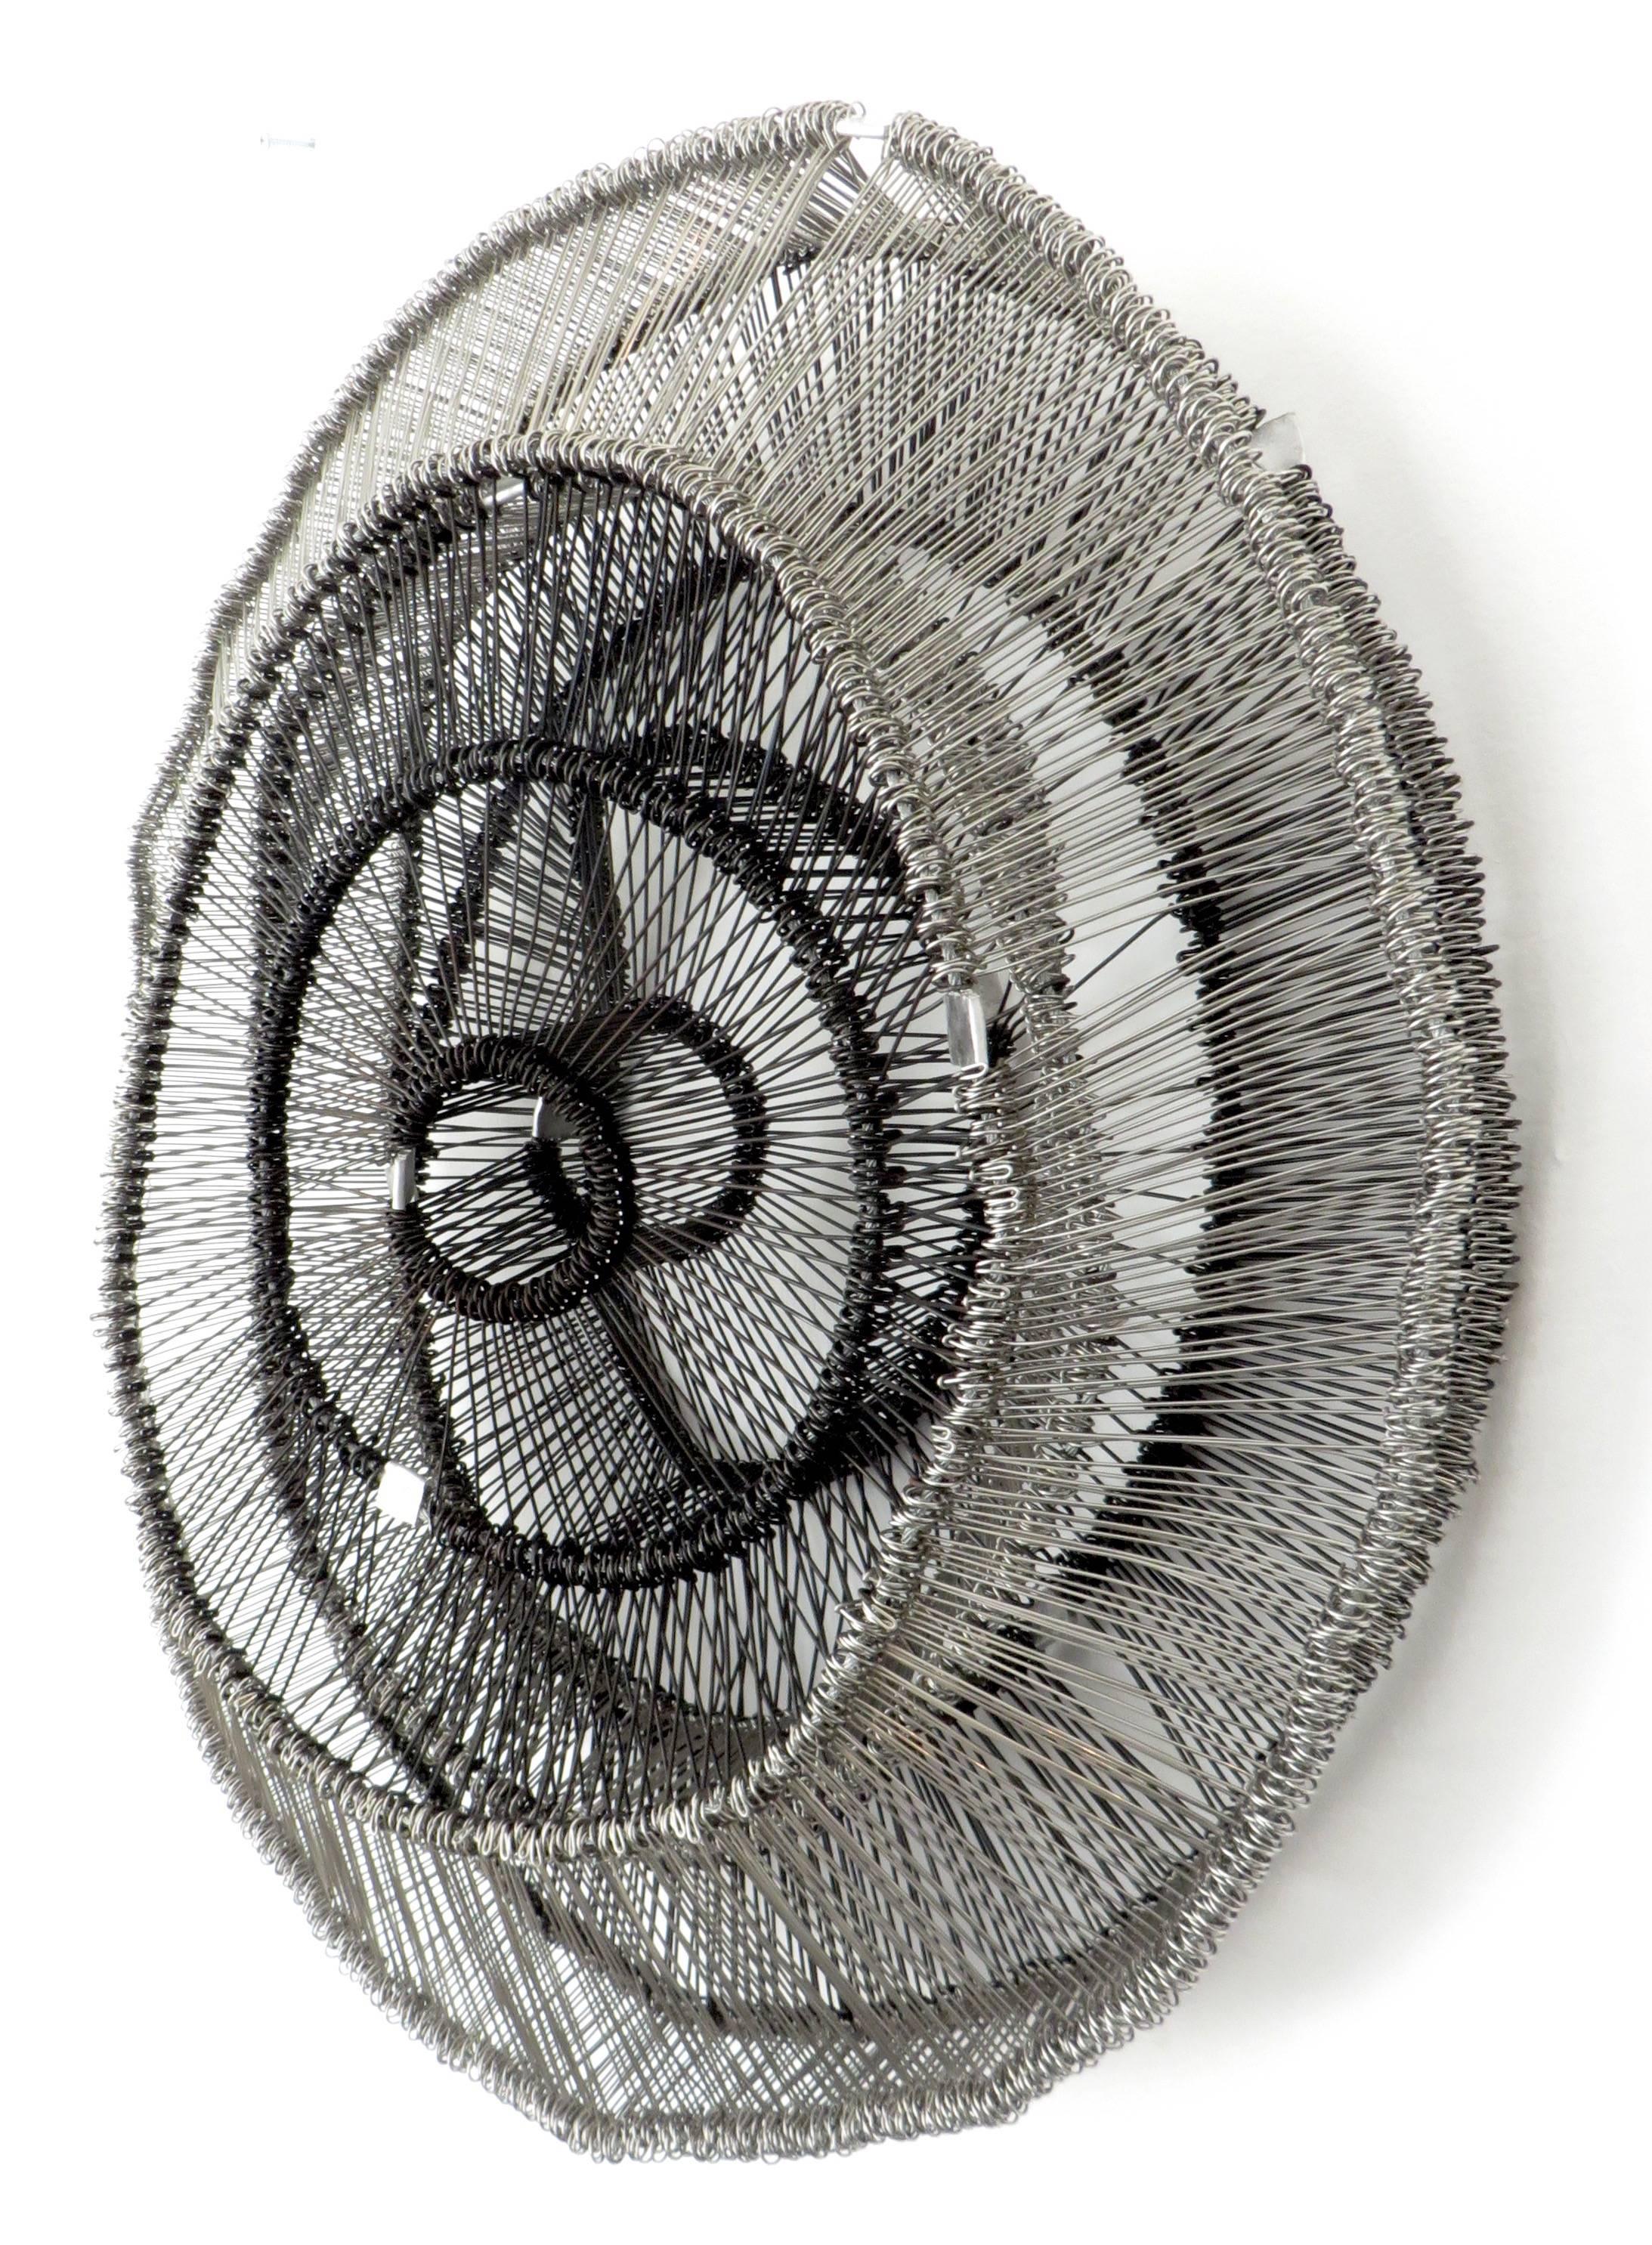 American Eric Gushee Emergence Series Black and Stainless Woven Metal Sculpture, 2016